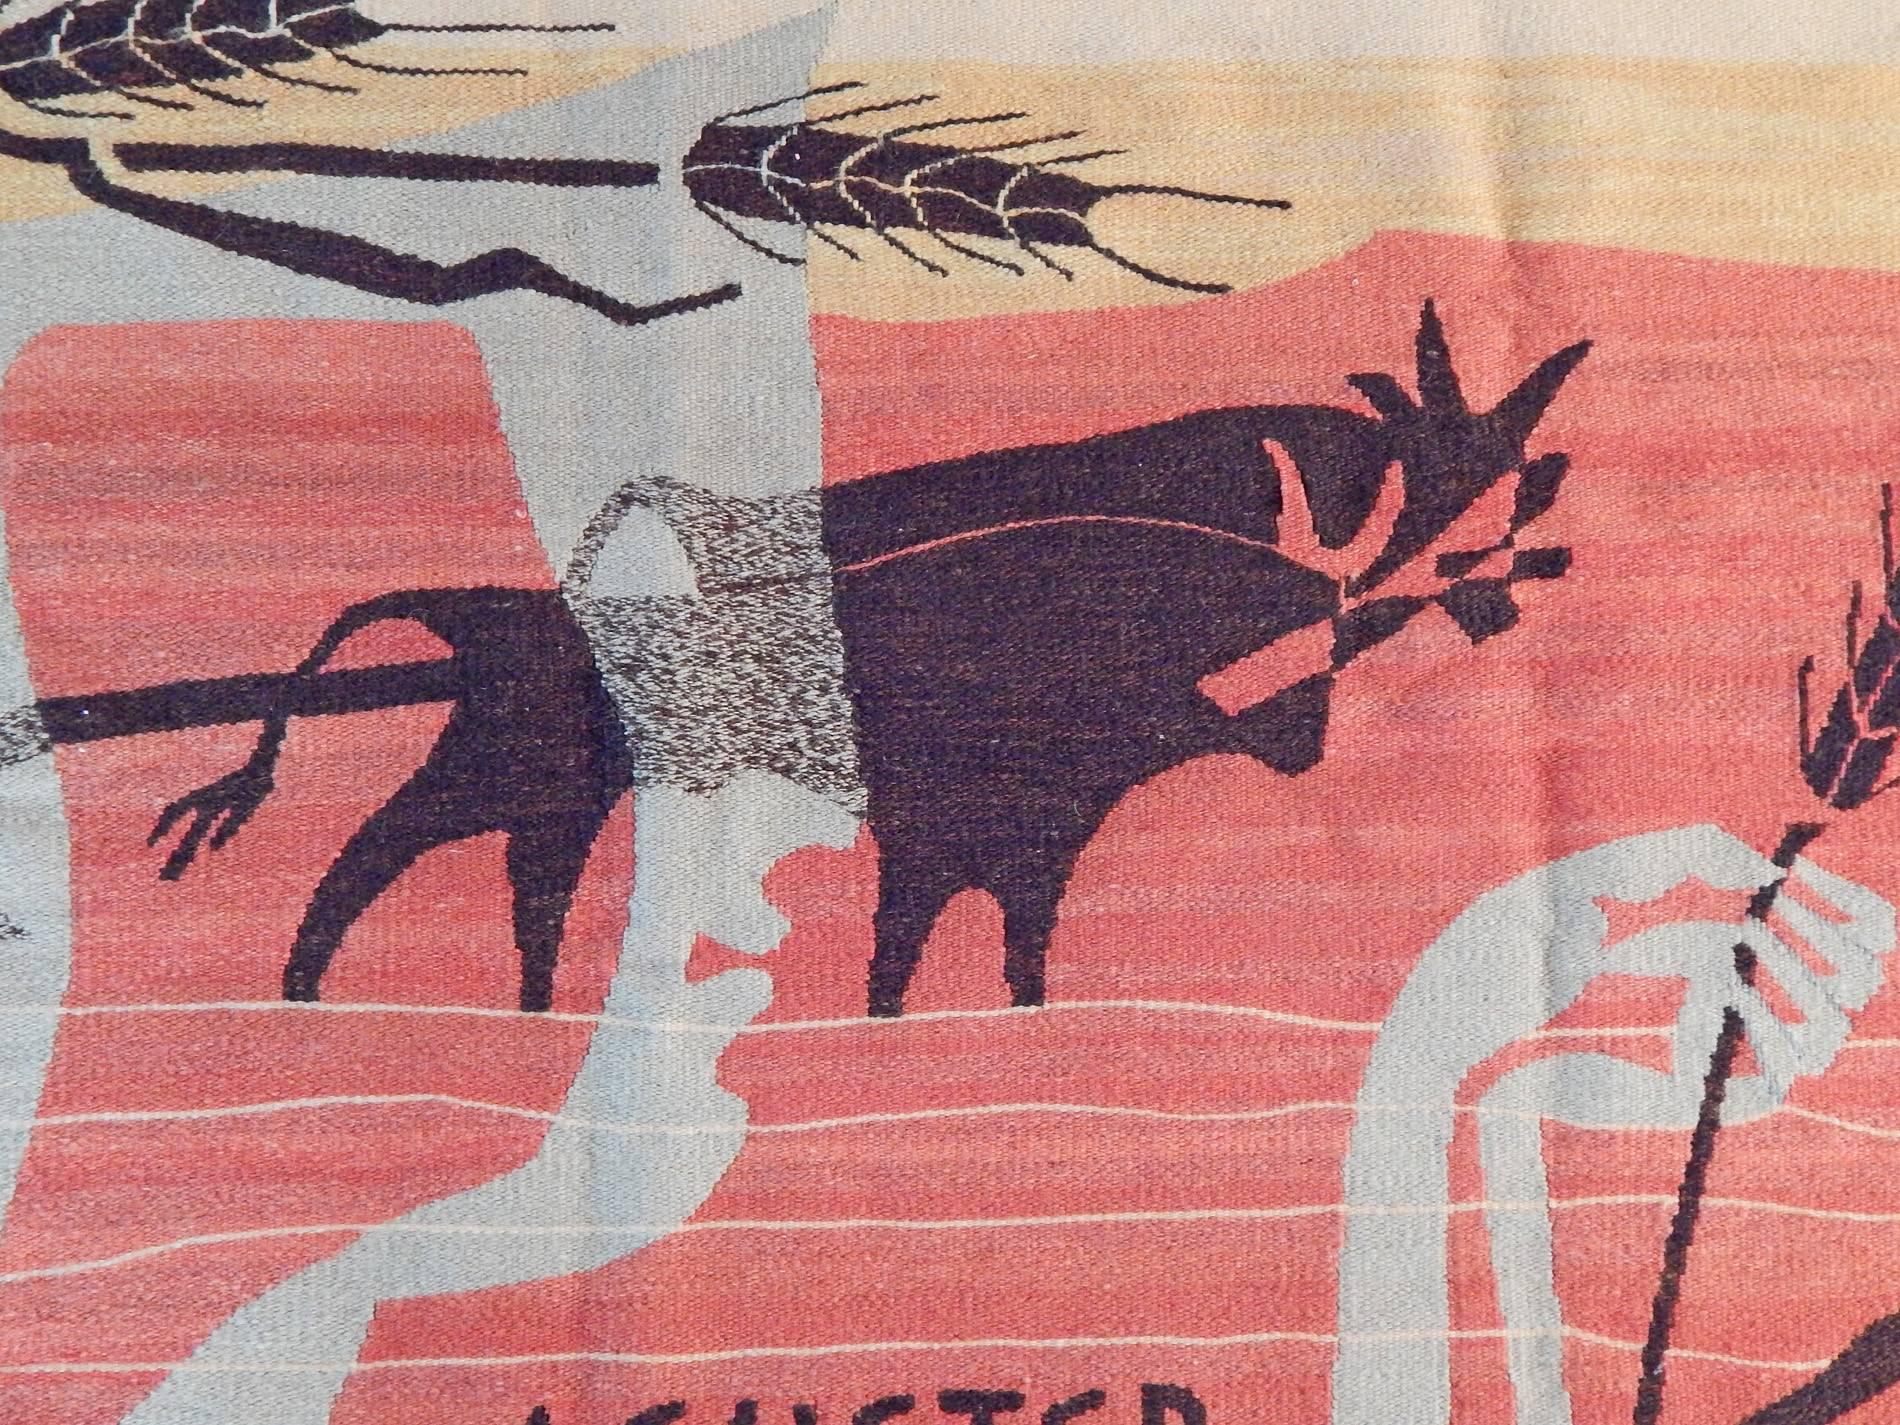 Woven from gorgeous yarns in coral, wheat, pale slate and black, this stunning Mid-Century tapestry depicts two layered images -- a classical figure holding a stalk of wheat, superimposed over a plowman with two bulls. Clearly showing the influence